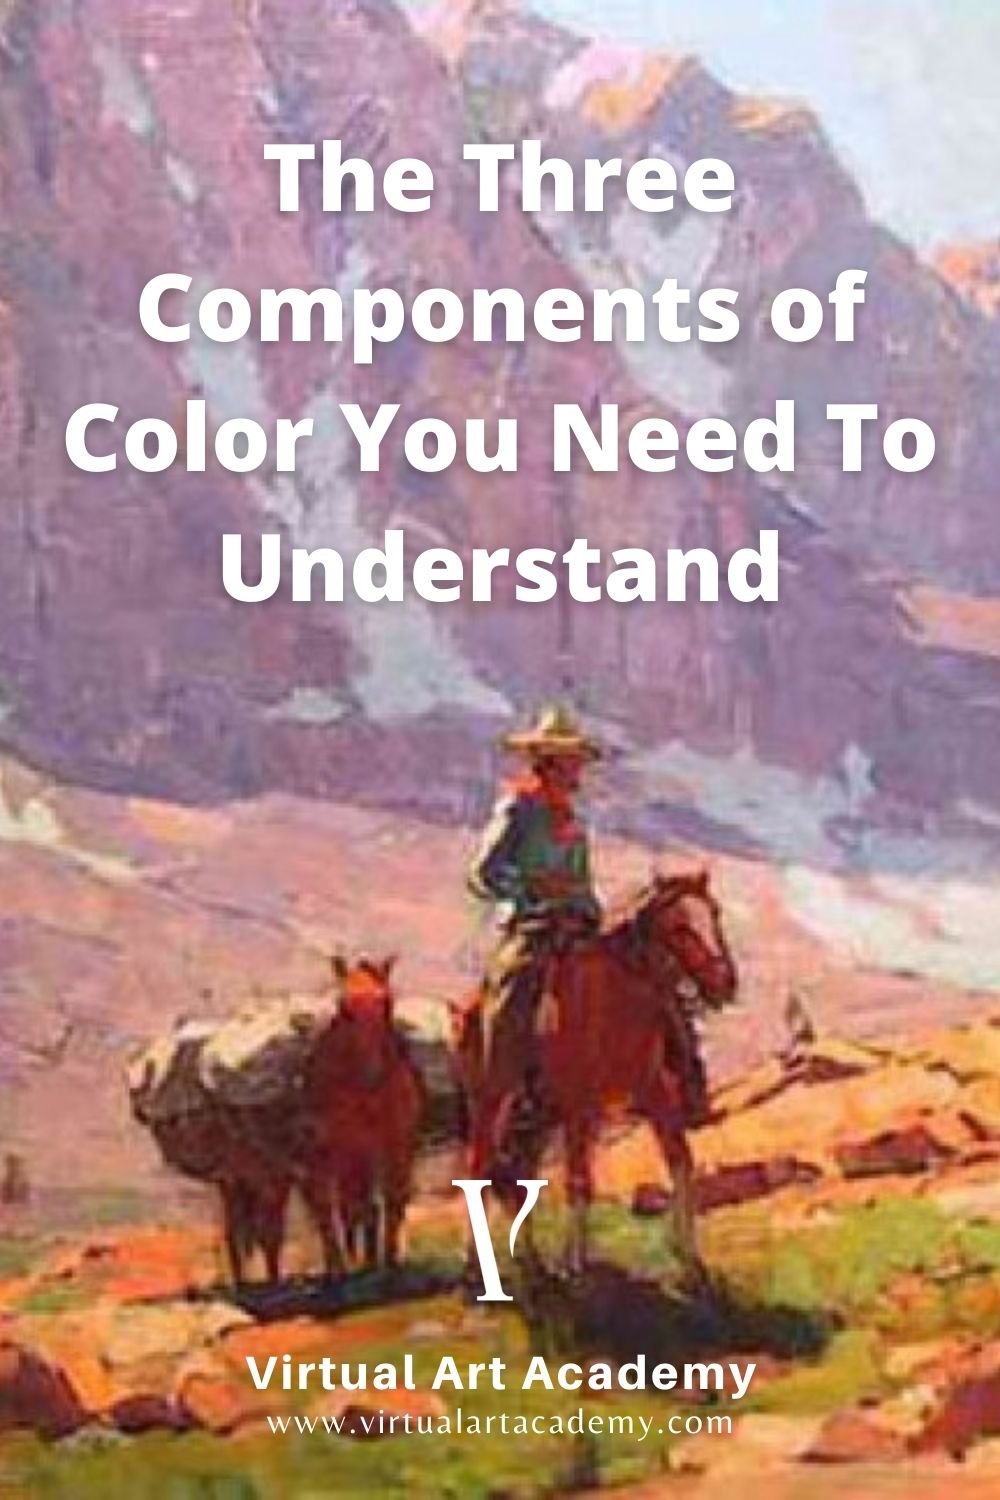 Visual Elements Of Art: The Three Components of Color